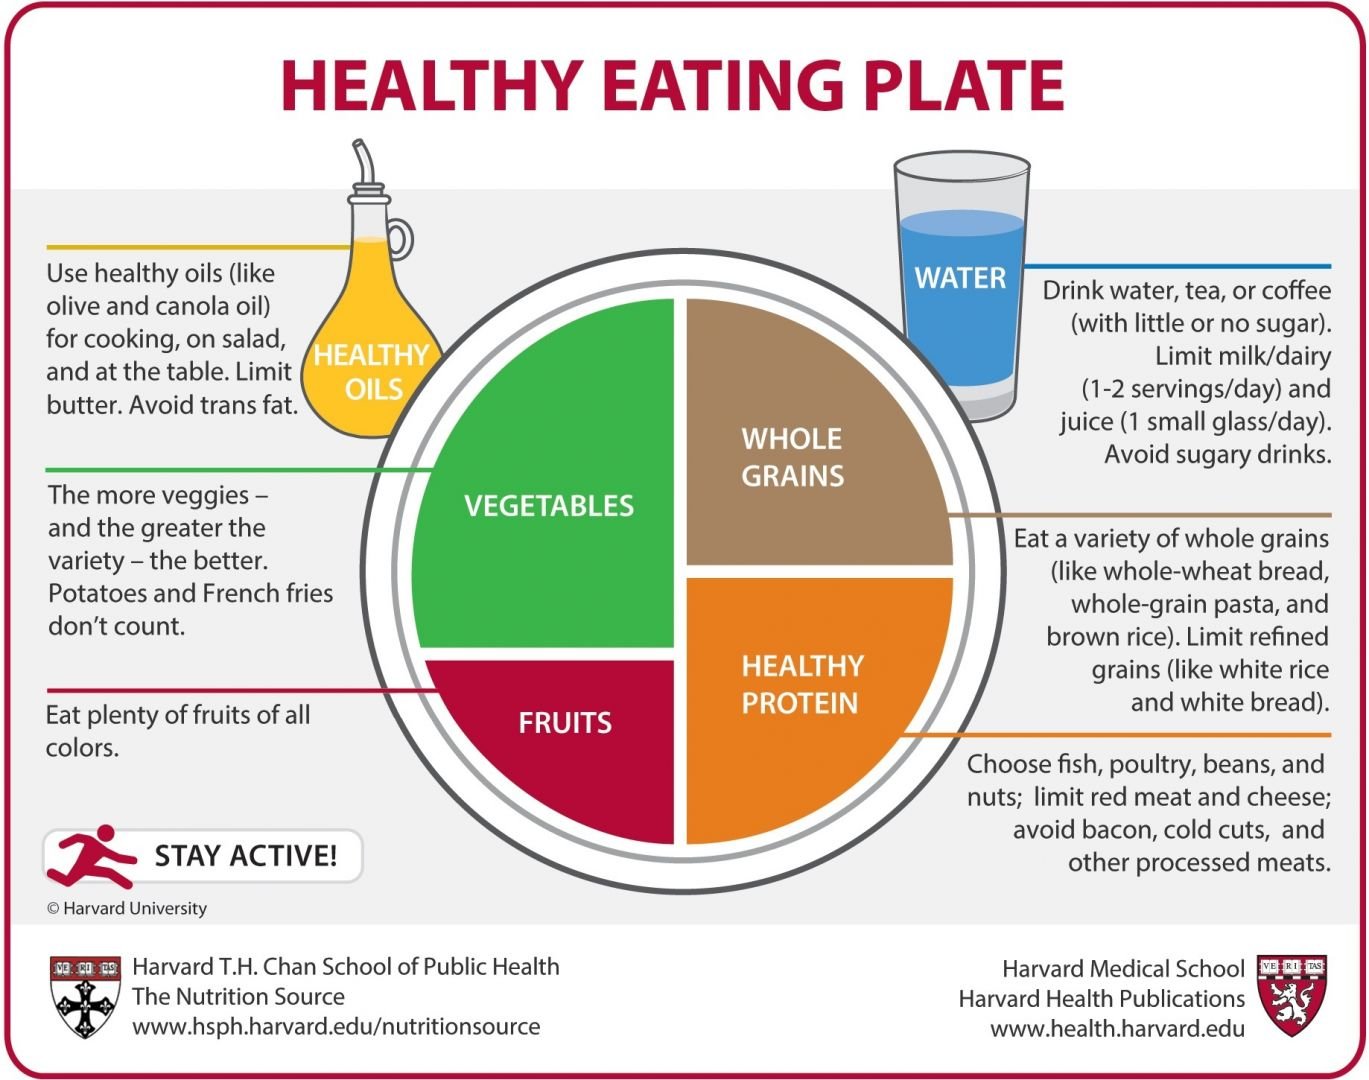 Ever heard of the Eatwell plate?